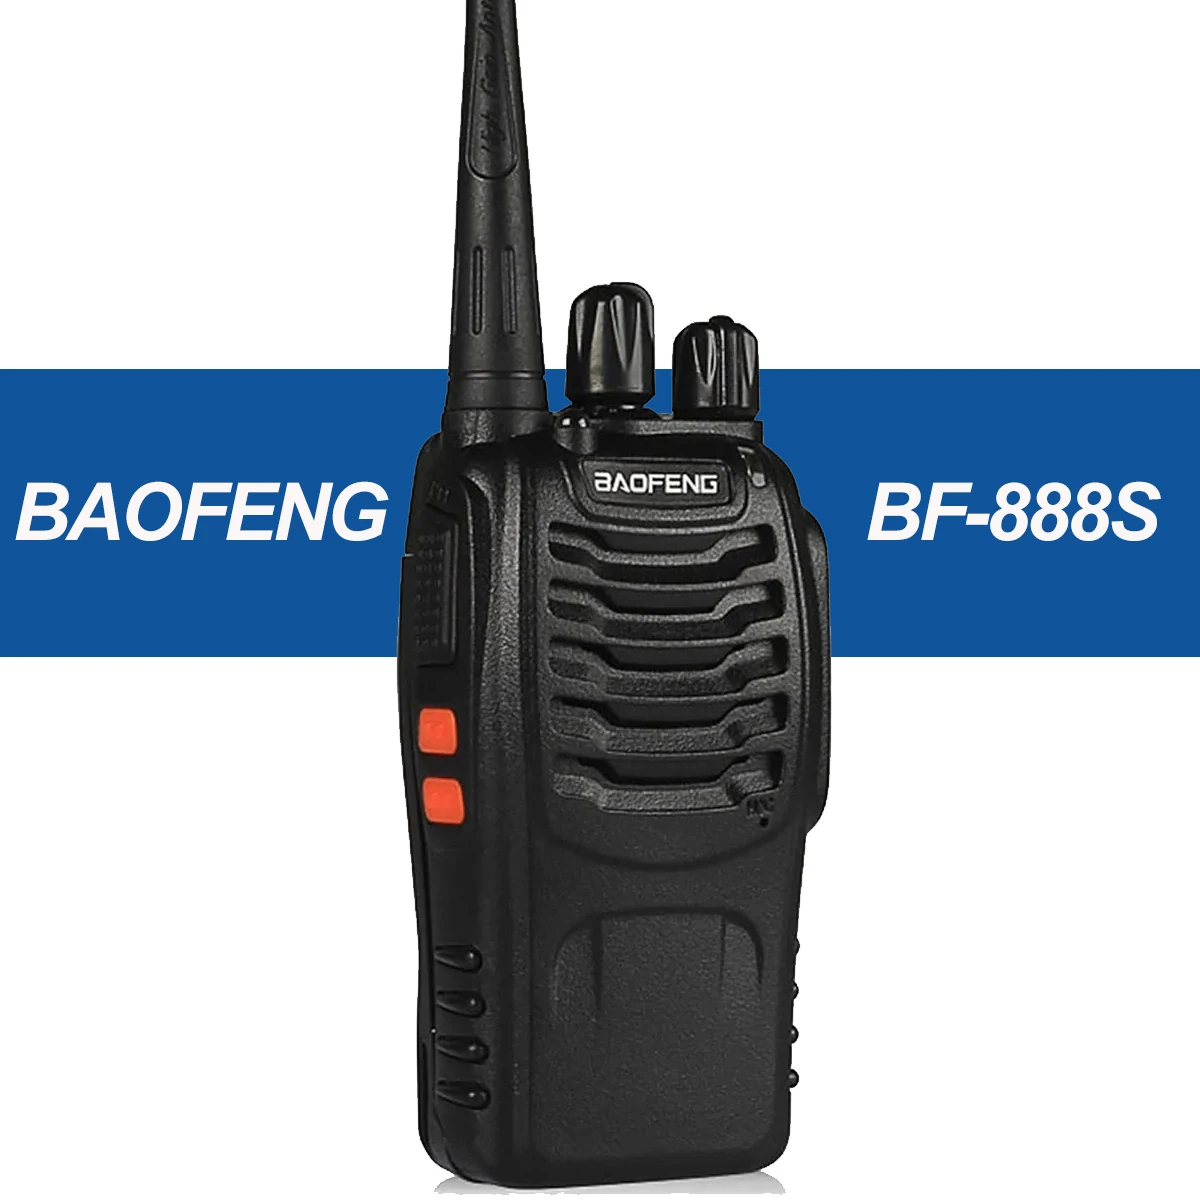 Original BaoFeng BF-888S Road Trip Walkie Talkie UHF 400-470MHz 16 Channels Long Distance High Endurance Two-way Radioso